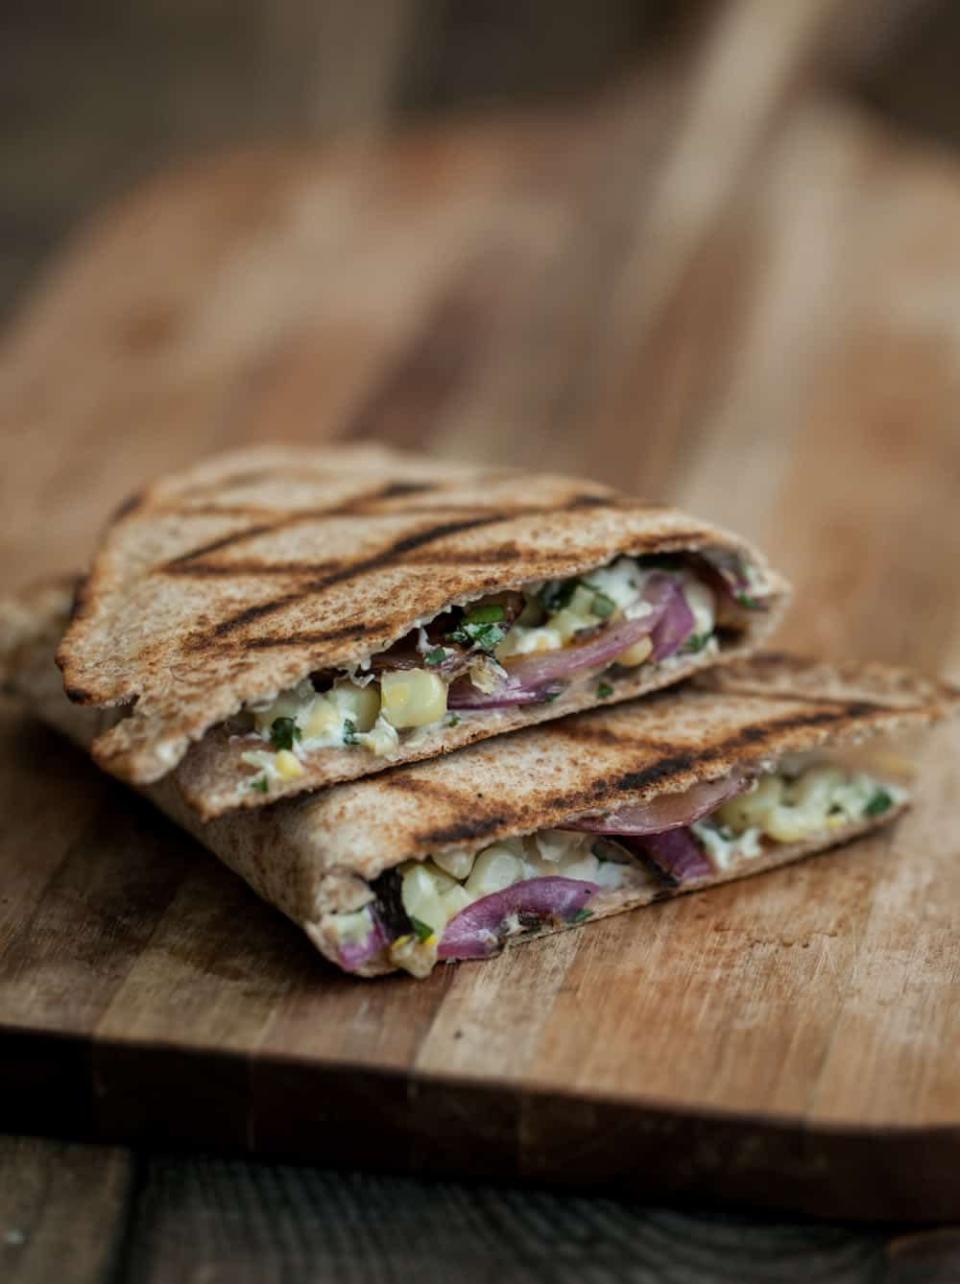 <p>The whipped coriander goat's cheese in this recipe sounds amazing.</p><p>Get the <a href="https://naturallyella.com/grilled-corn-onion-and-whipped-cilantro-goat-cheese-quesadilla/" rel="nofollow noopener" target="_blank" data-ylk="slk:Grilled Corn, Onion, and Whipped Coriander Goat's Cheese Quesadilla" class="link ">Grilled Corn, Onion, and Whipped Coriander Goat's Cheese Quesadilla</a> recipe. </p><p>Recipe from <a href="https://naturallyella.com/" rel="nofollow noopener" target="_blank" data-ylk="slk:Naturally Ella" class="link ">Naturally Ella</a>. </p>